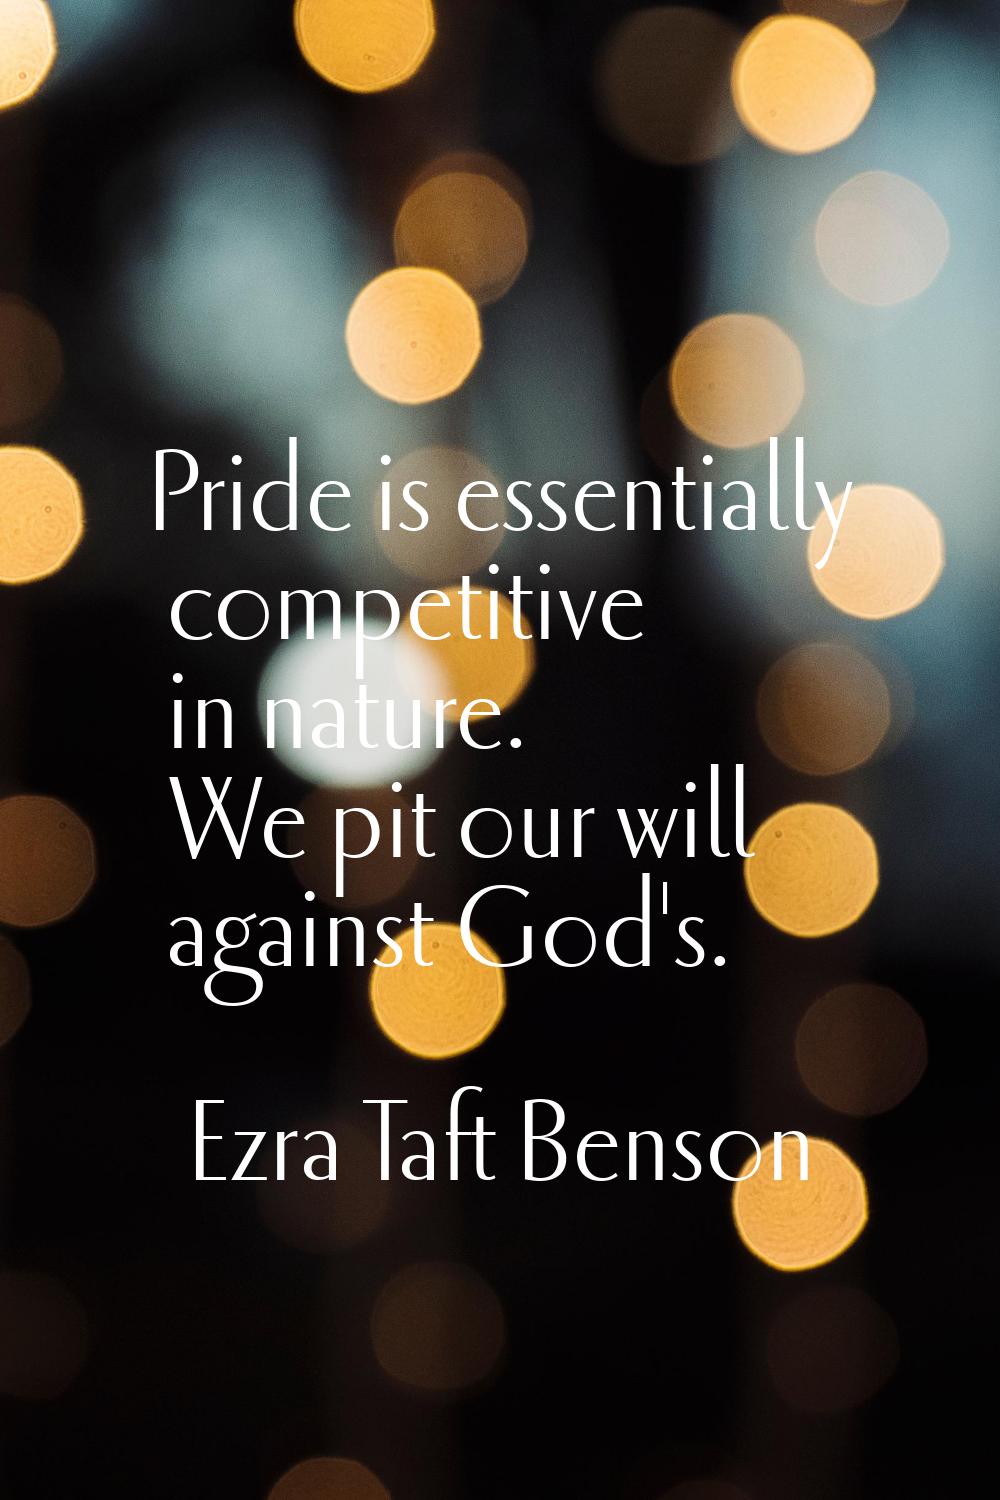 Pride is essentially competitive in nature. We pit our will against God's.